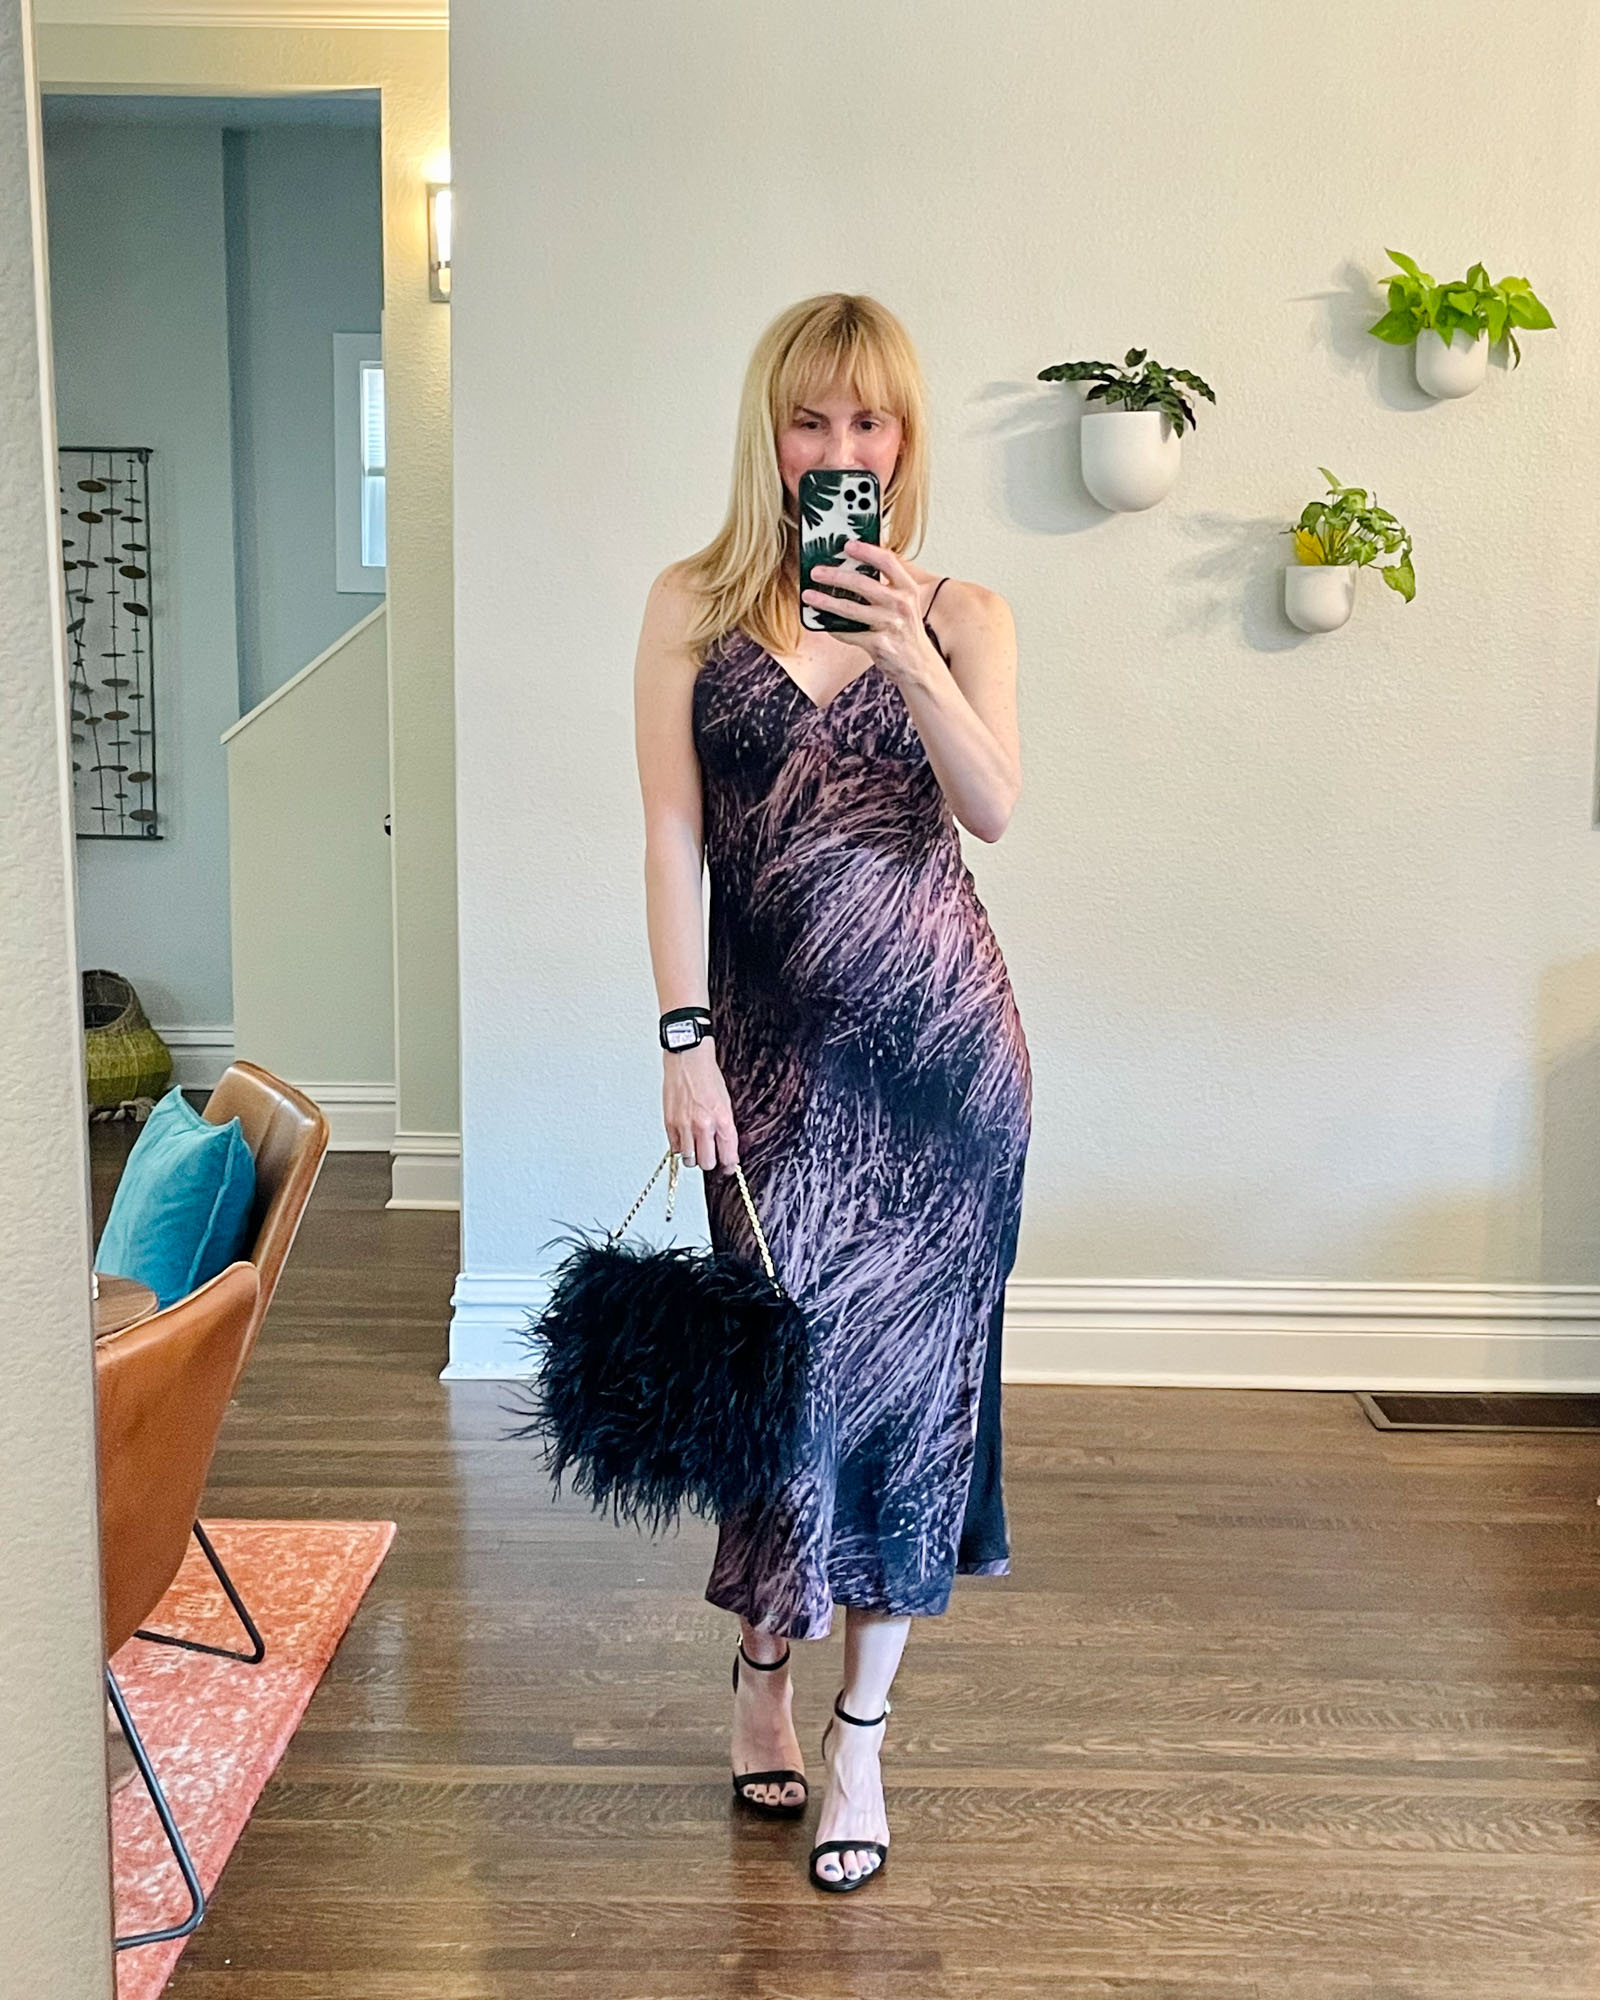 Wearing the Allsaints Melody slip dress with black heels and a feather bag.